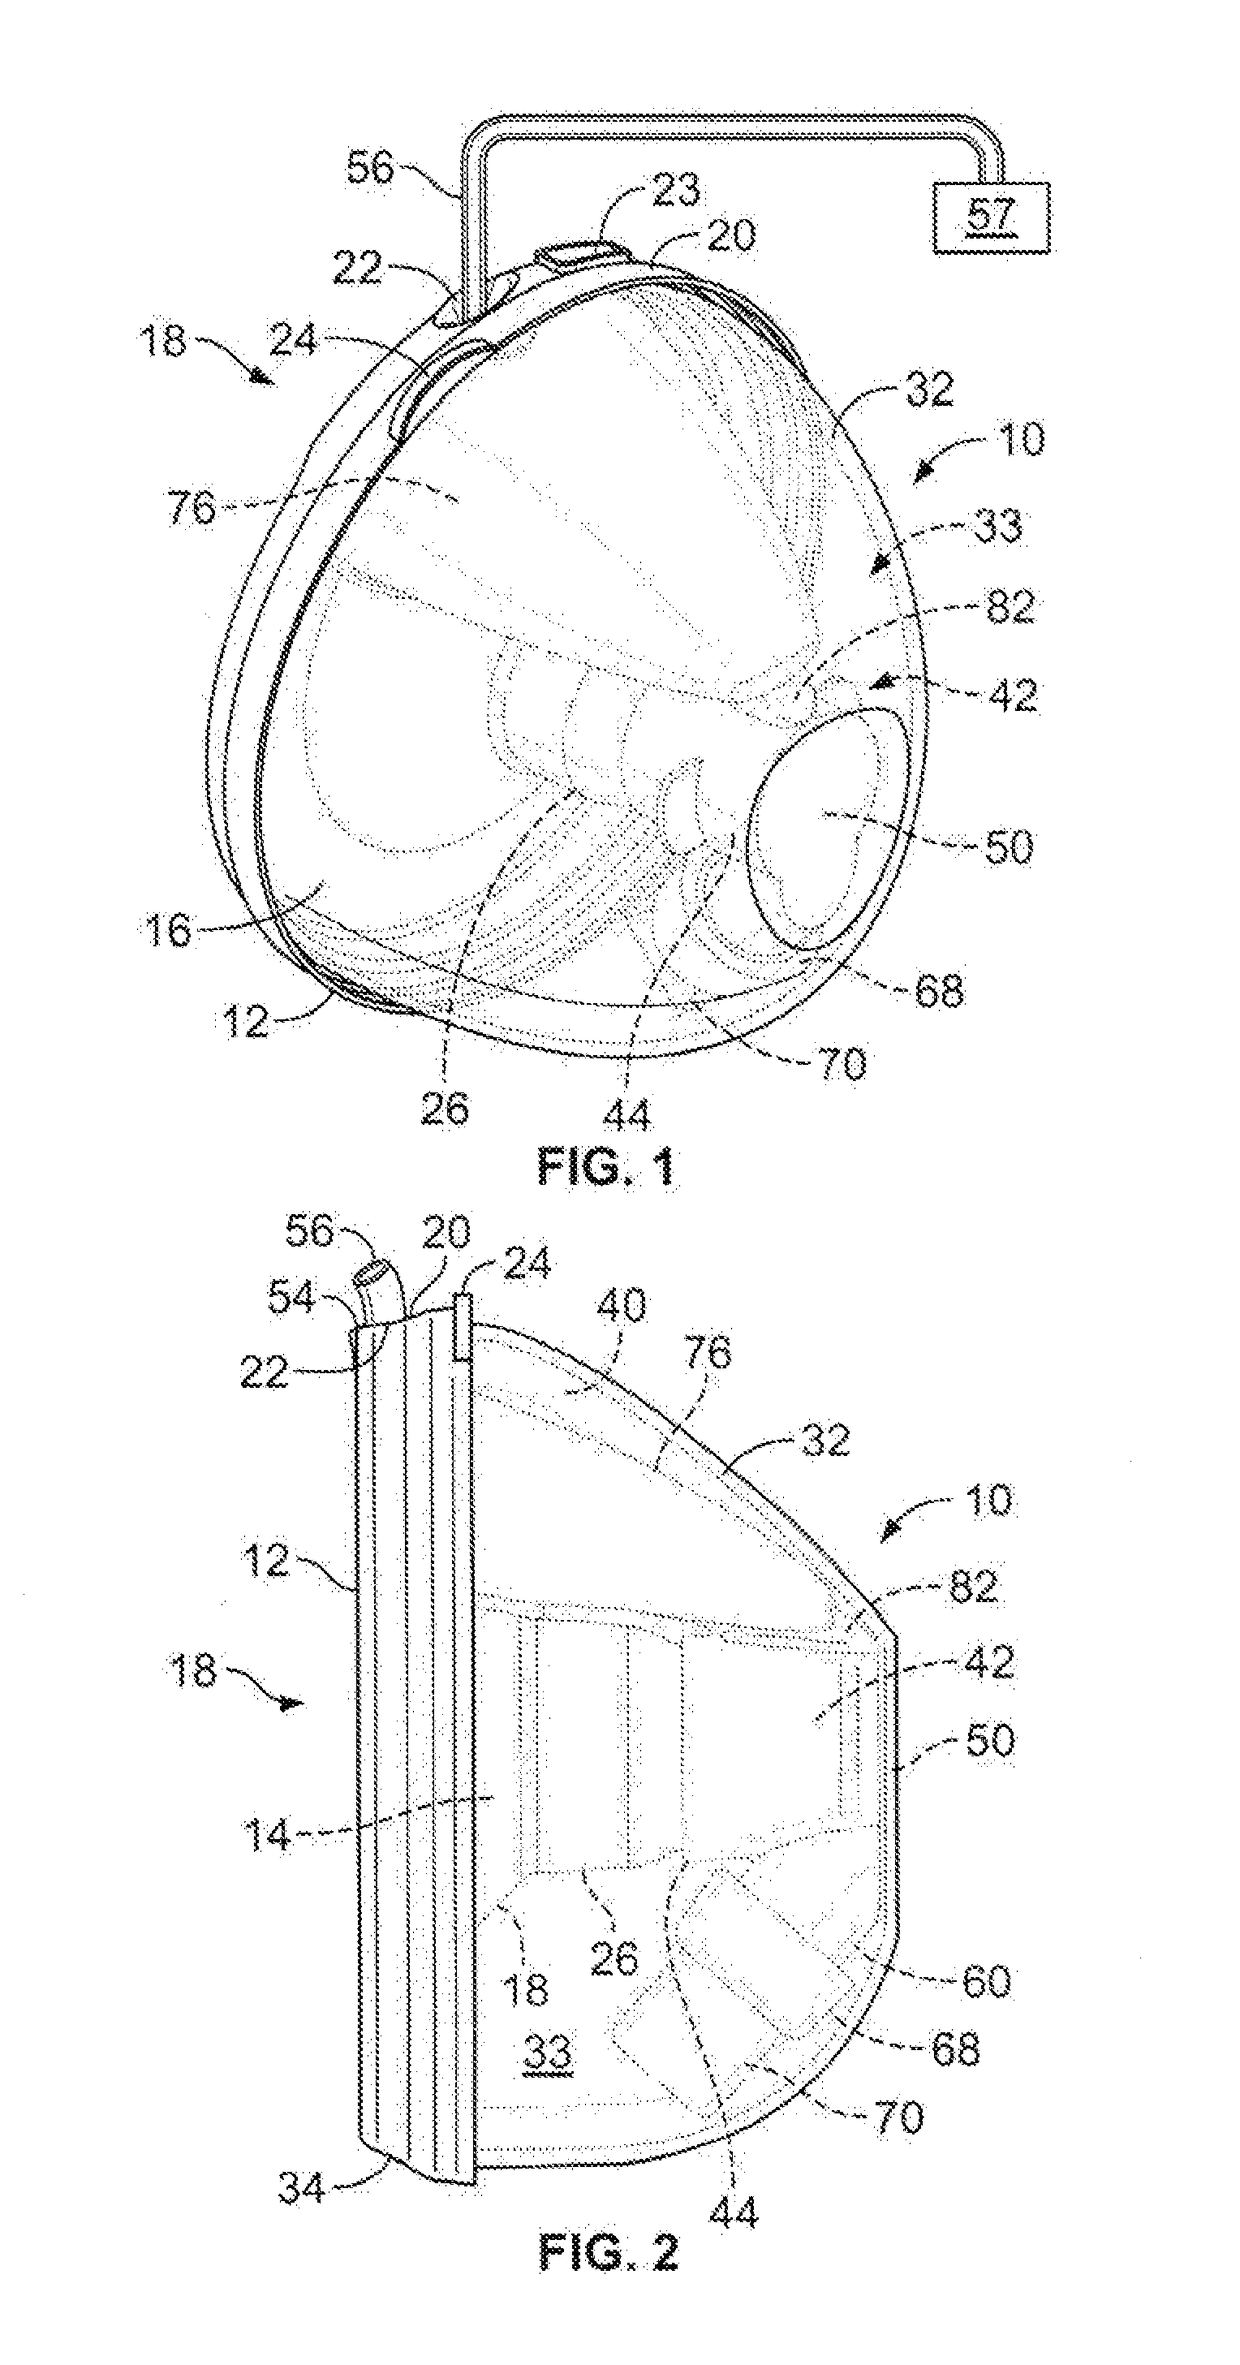 Submersible Breast Pump Protection Mechanism for a Breast Milk Collection Device with Self-Contained Reservoir